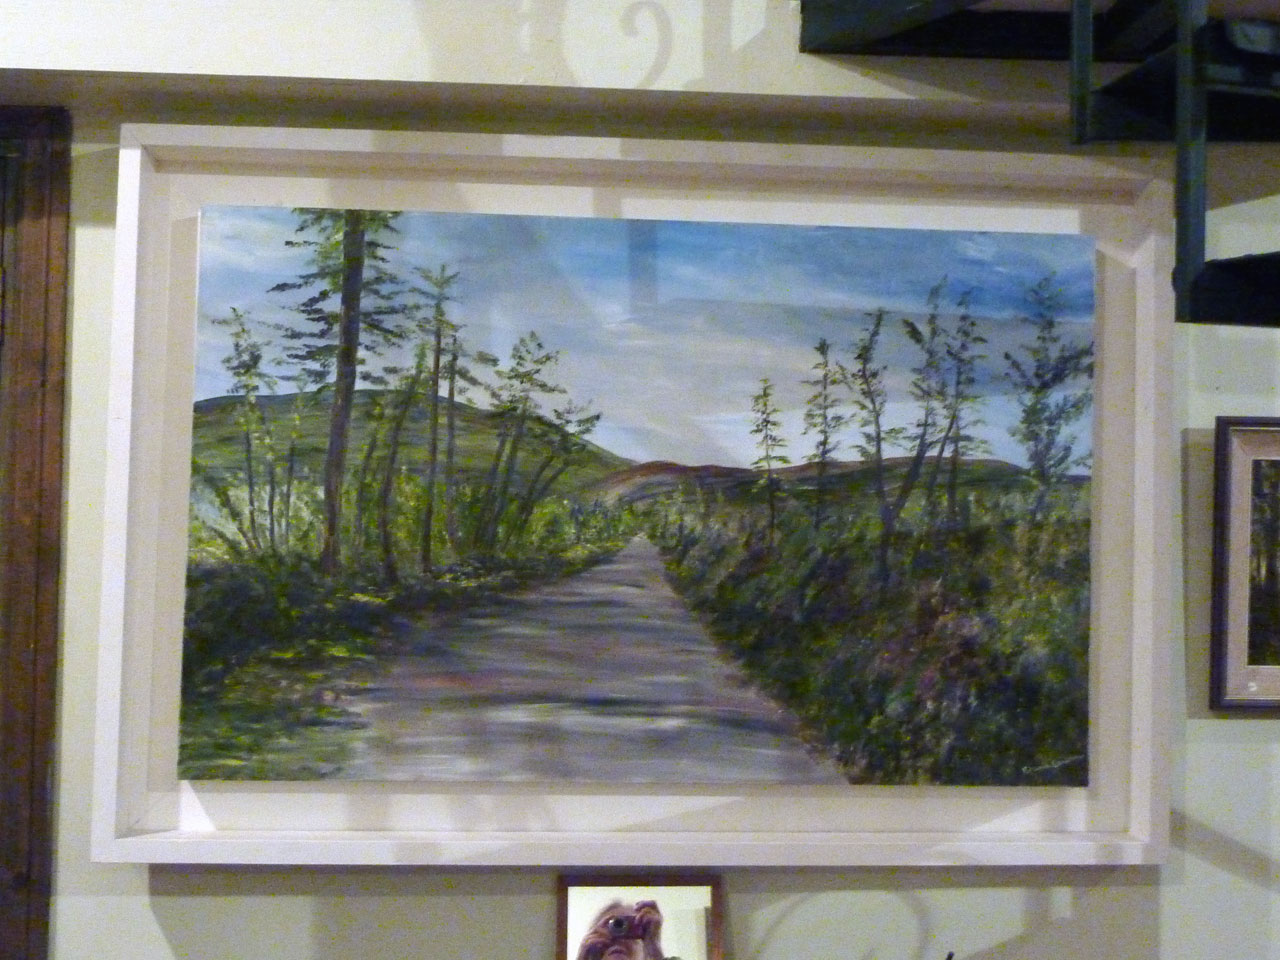 Original Artwork Paintings for Sale | Cullintra House Art Gallery | Patricia Cantlon Artist